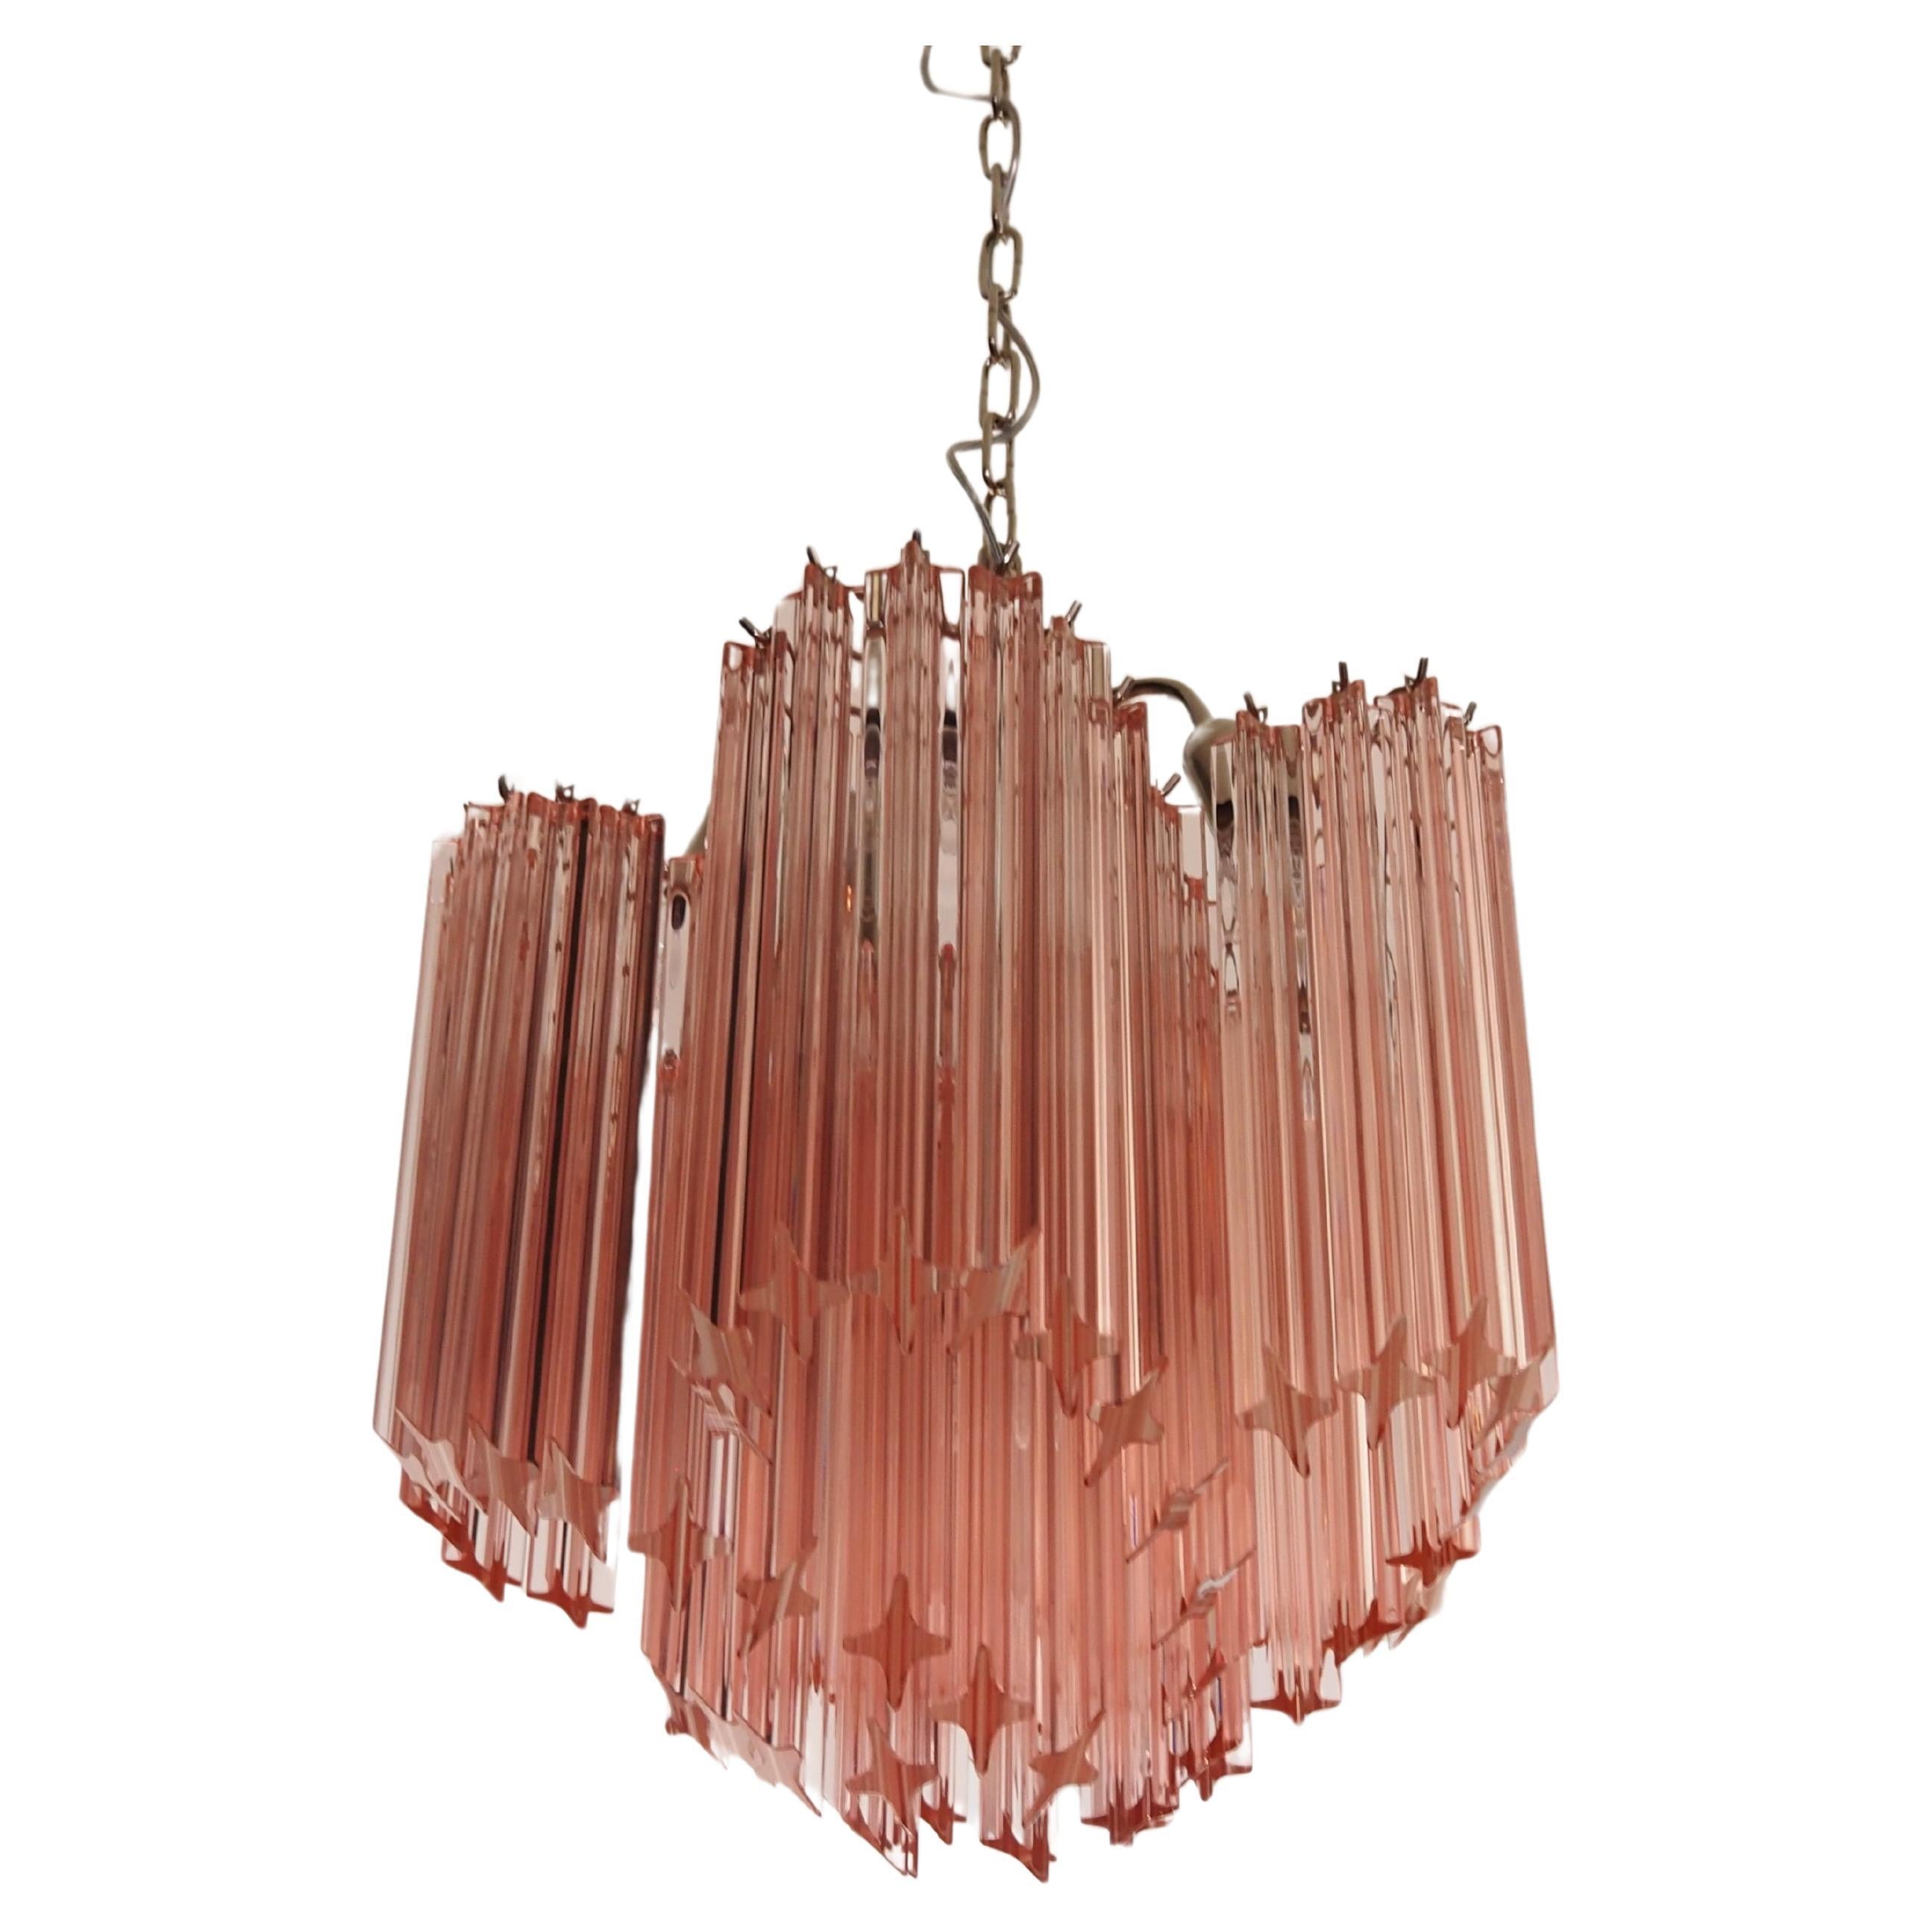 A magnificent Murano glass unique chandelier, spiral shape, very elegant, 60 pink quadriedri on nickel metal frame. This Mid-Century Italian chandelier is truly a timeless classic.
Period: late xx century
Dimensions: 46,50inches (120 cm) height with